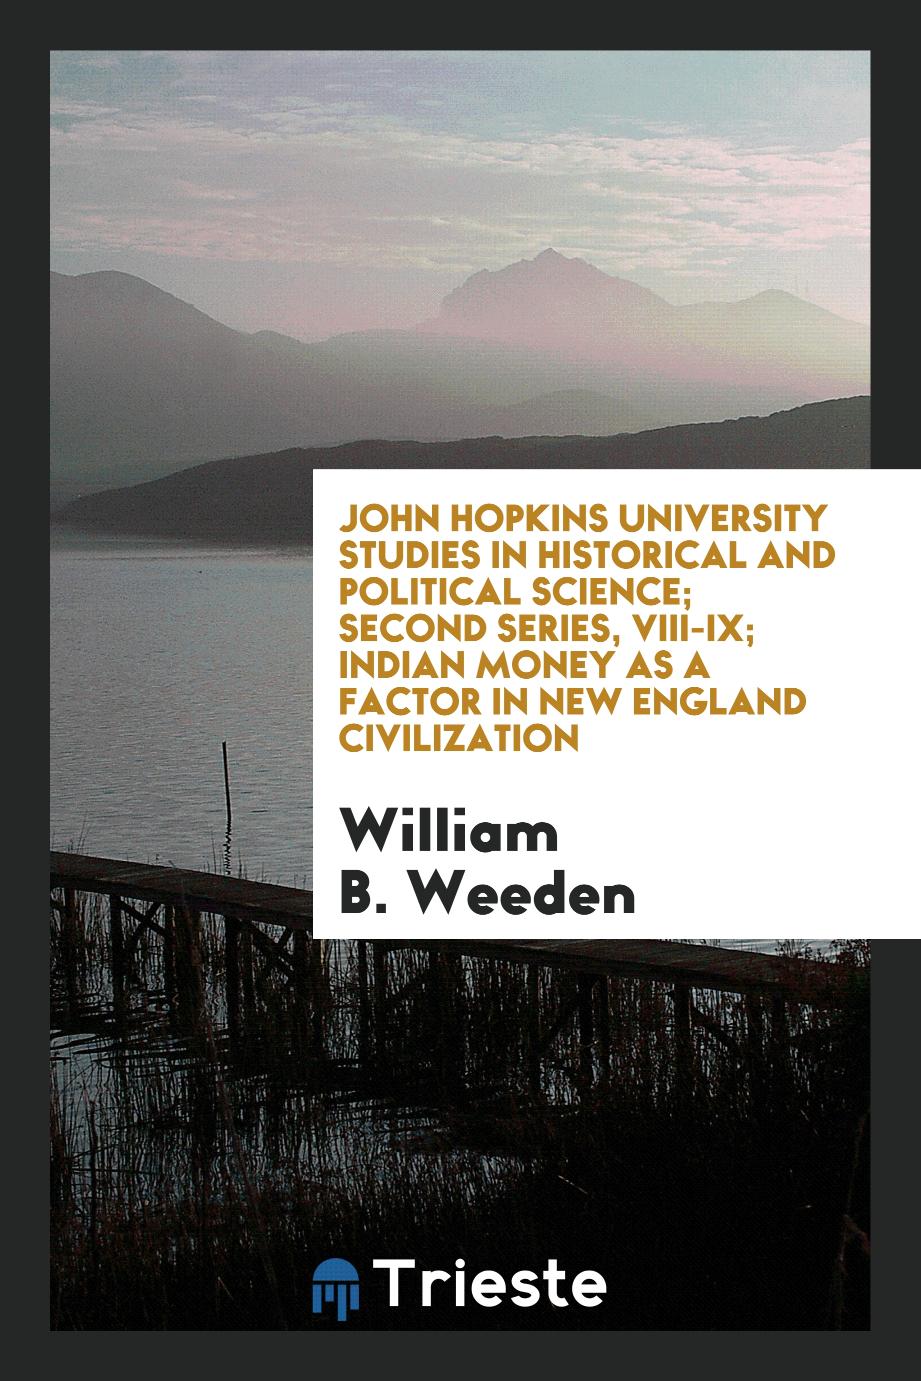 John Hopkins University Studies in Historical and Political Science; Second series, VIII-IX; Indian Money as a Factor in New England Civilization